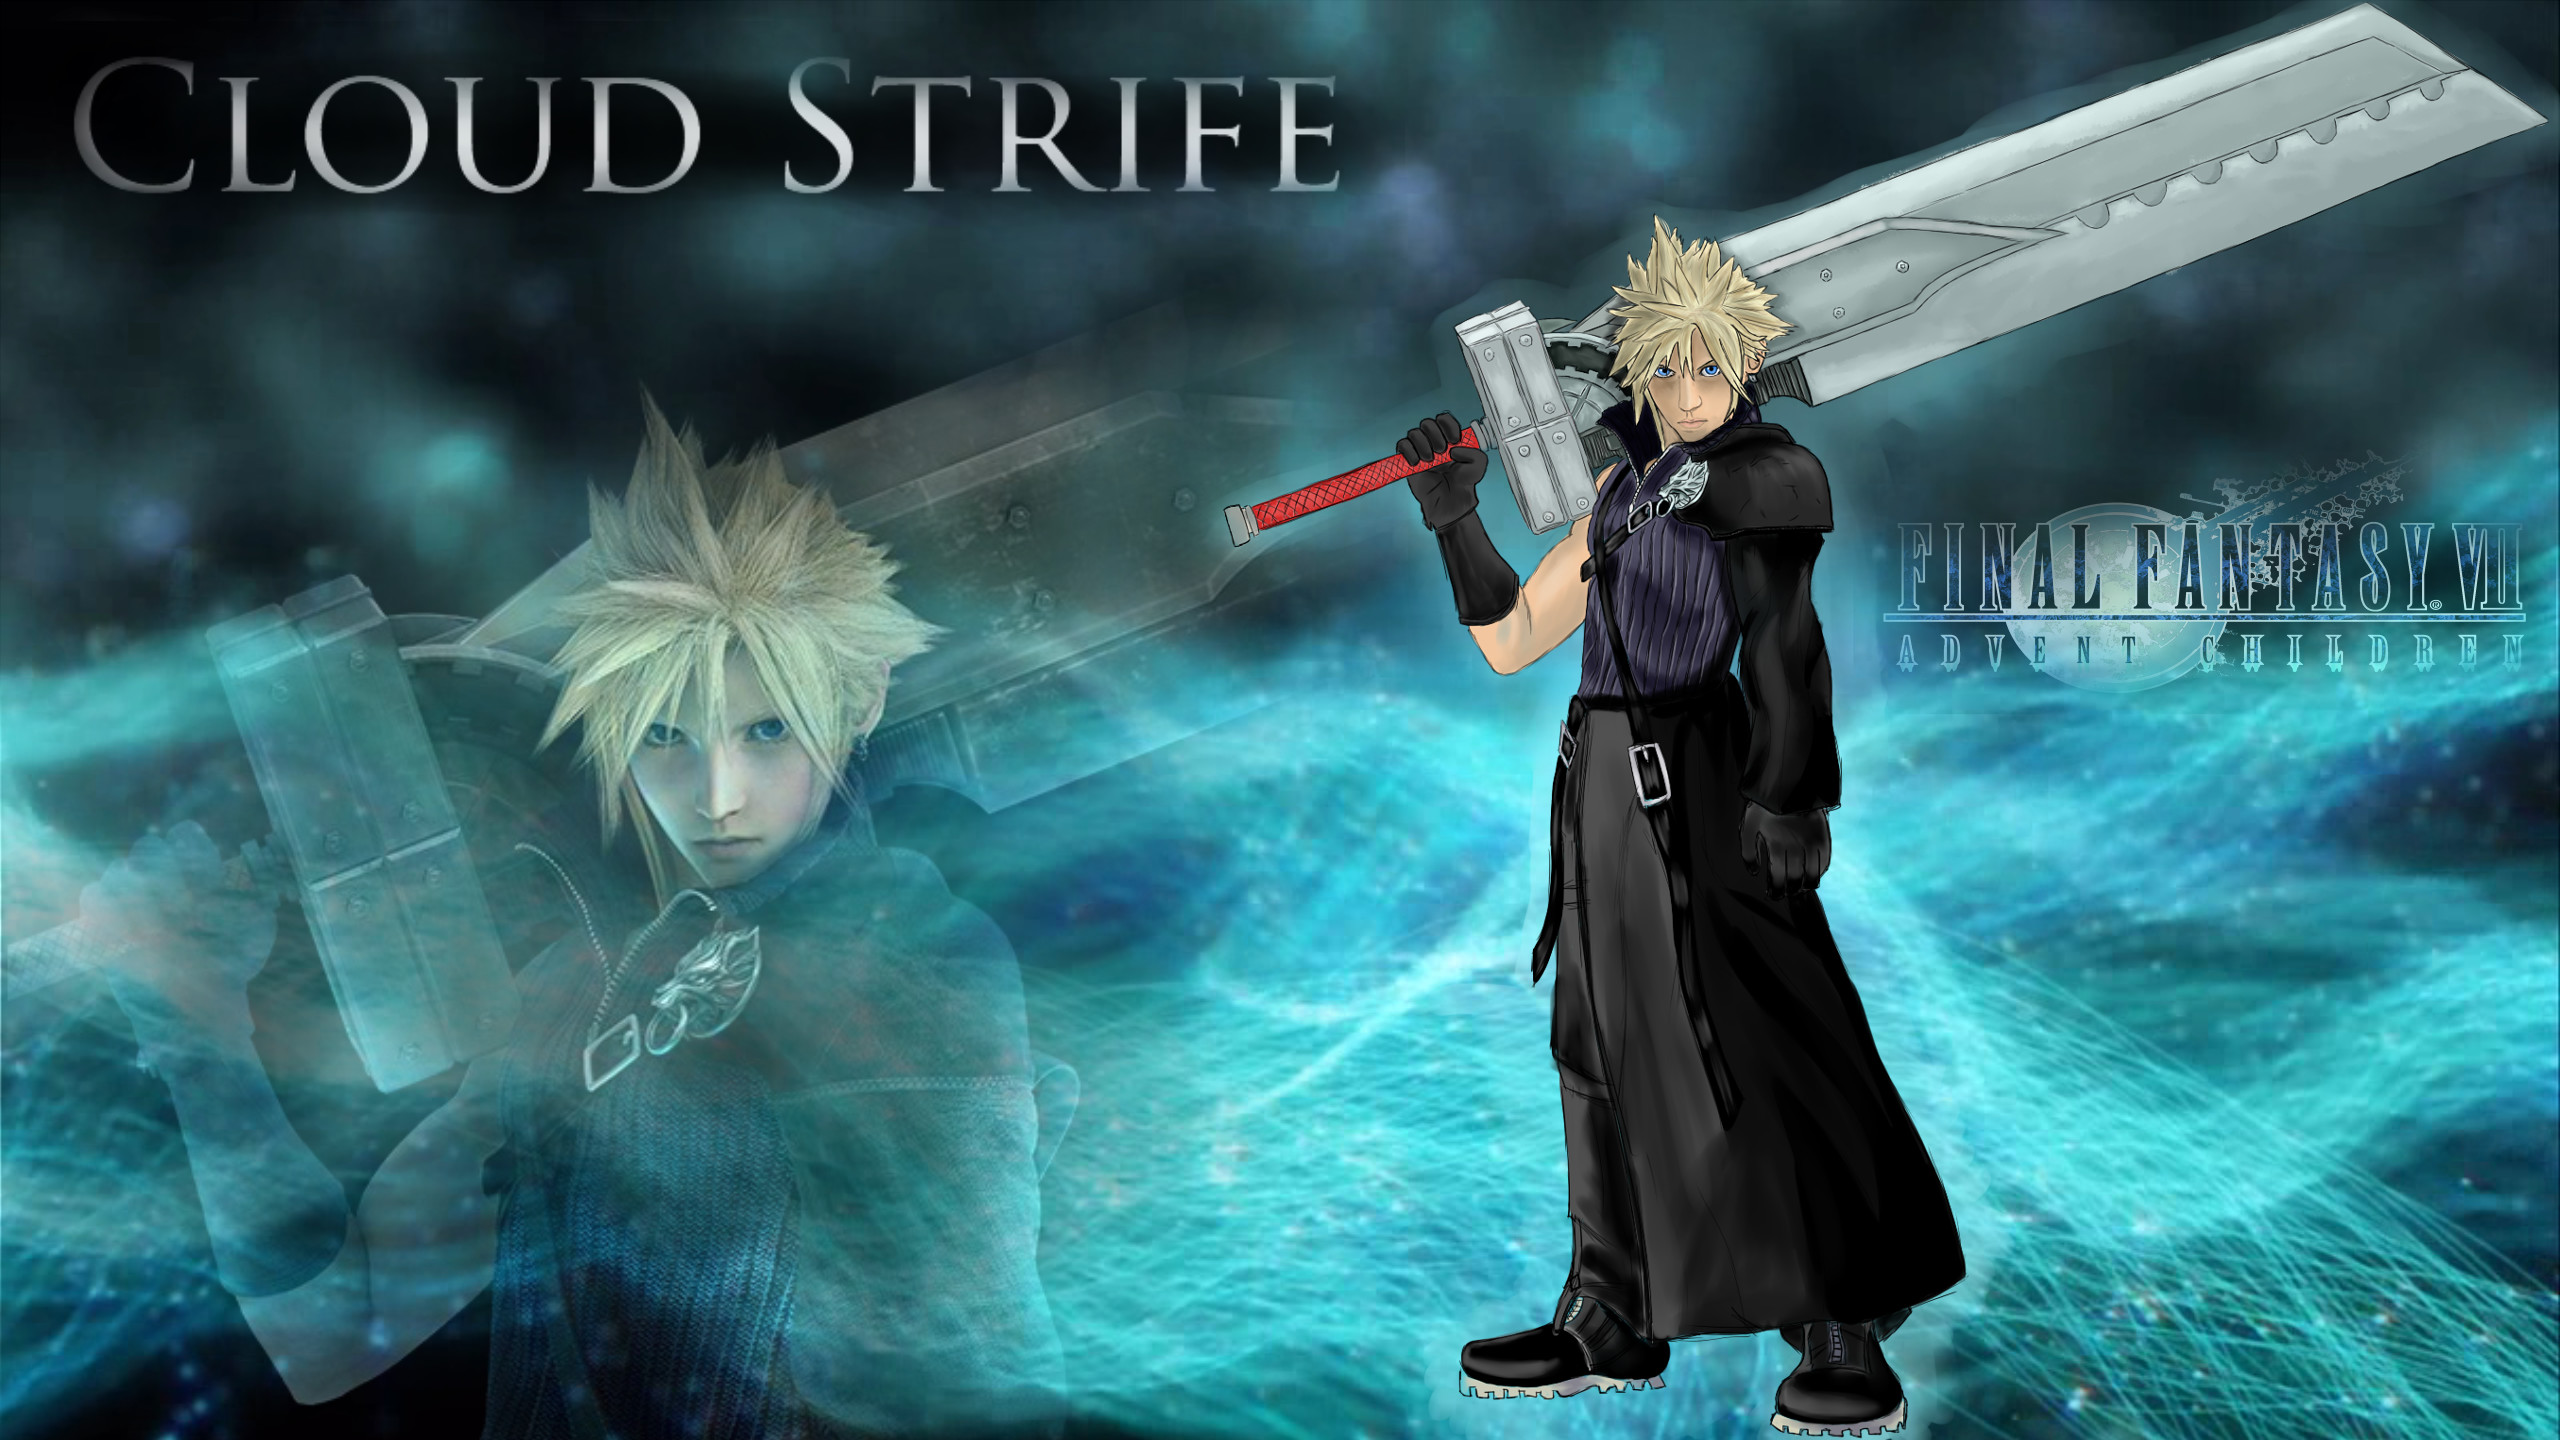 2560x1440 Cloud Strife Wallpaper 2 by Robsa990 Cloud Strife Wallpaper 2 by ...